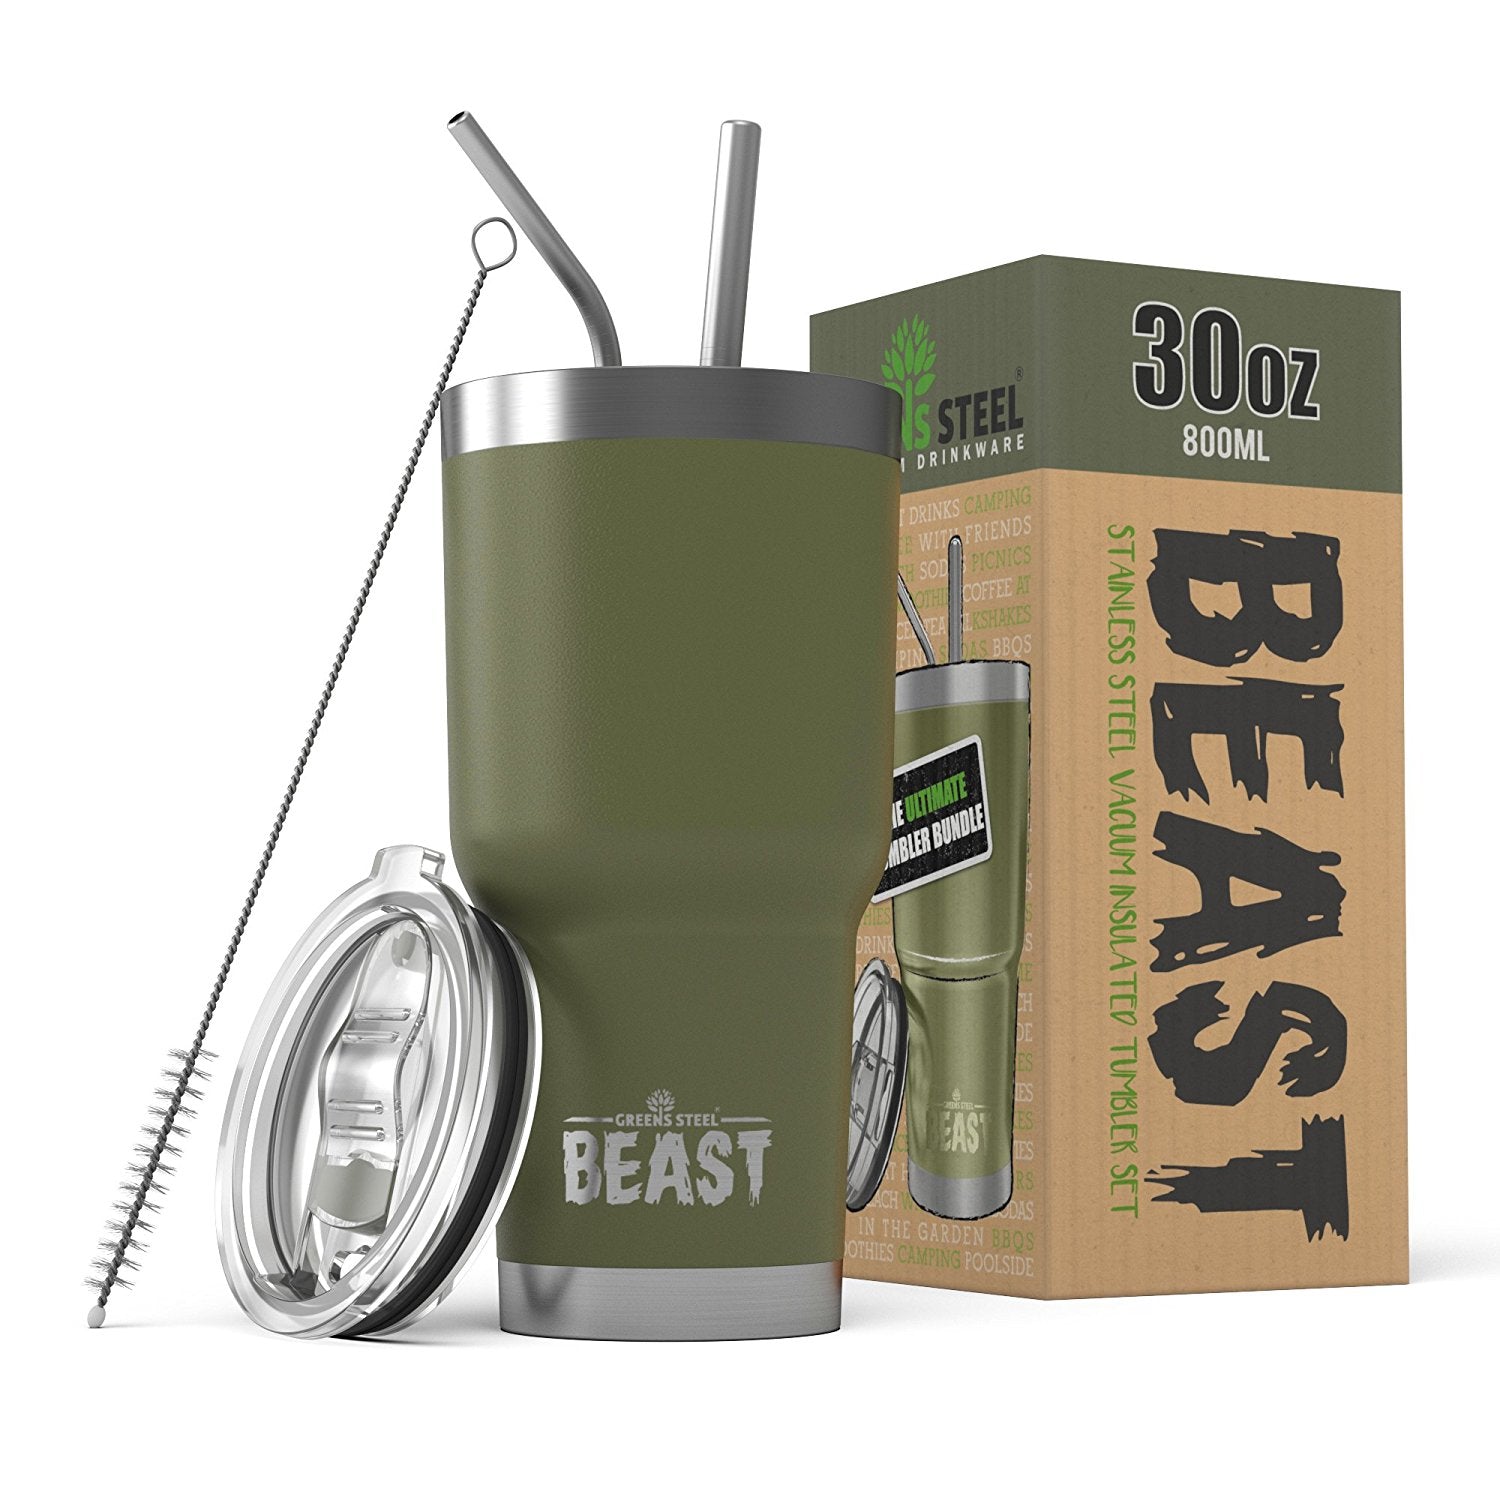 Greens Steel Beast 20oz Tumbler Insulated Stainless Steel Coffee Cup with Lid, 2 Straws, Brush & Gift Box by (20 oz, Aquamarine Blue)